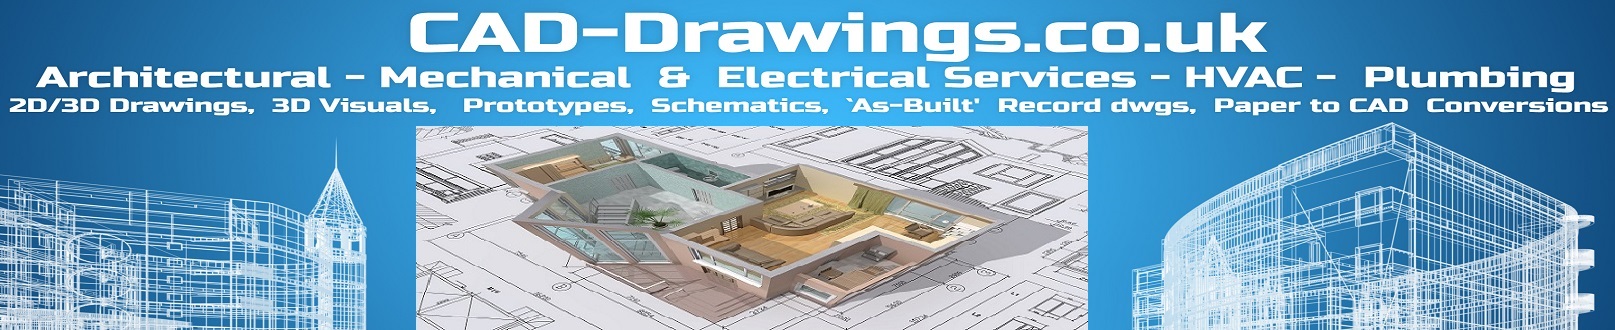 cad-drawings.co.uk -new logo Pic.2